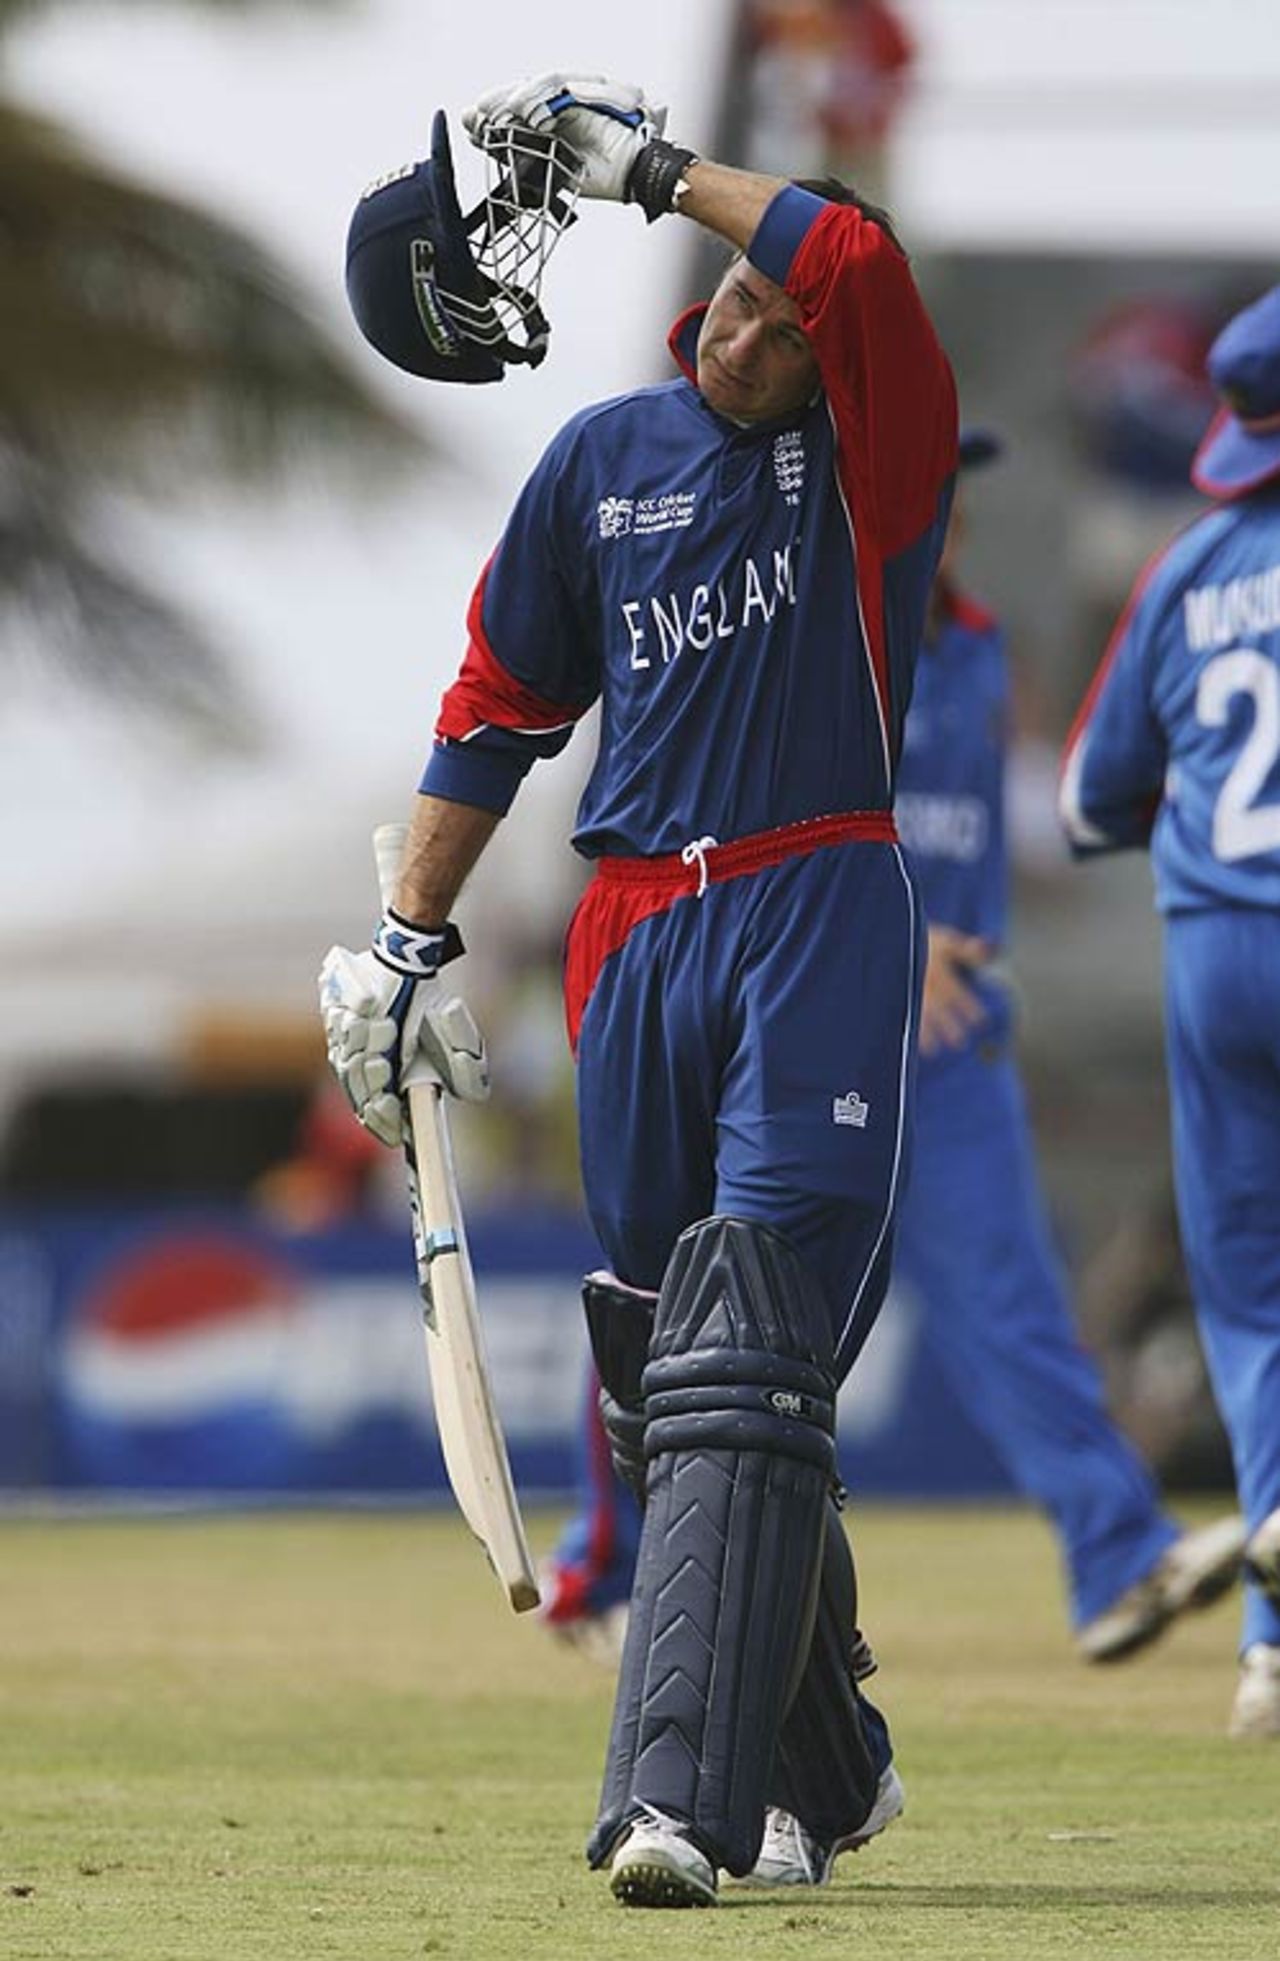 Michael Vaughan holed out to square leg for 18, England v Bermuda, World Cup warm-up, Arnos Vale, March 5, 2007